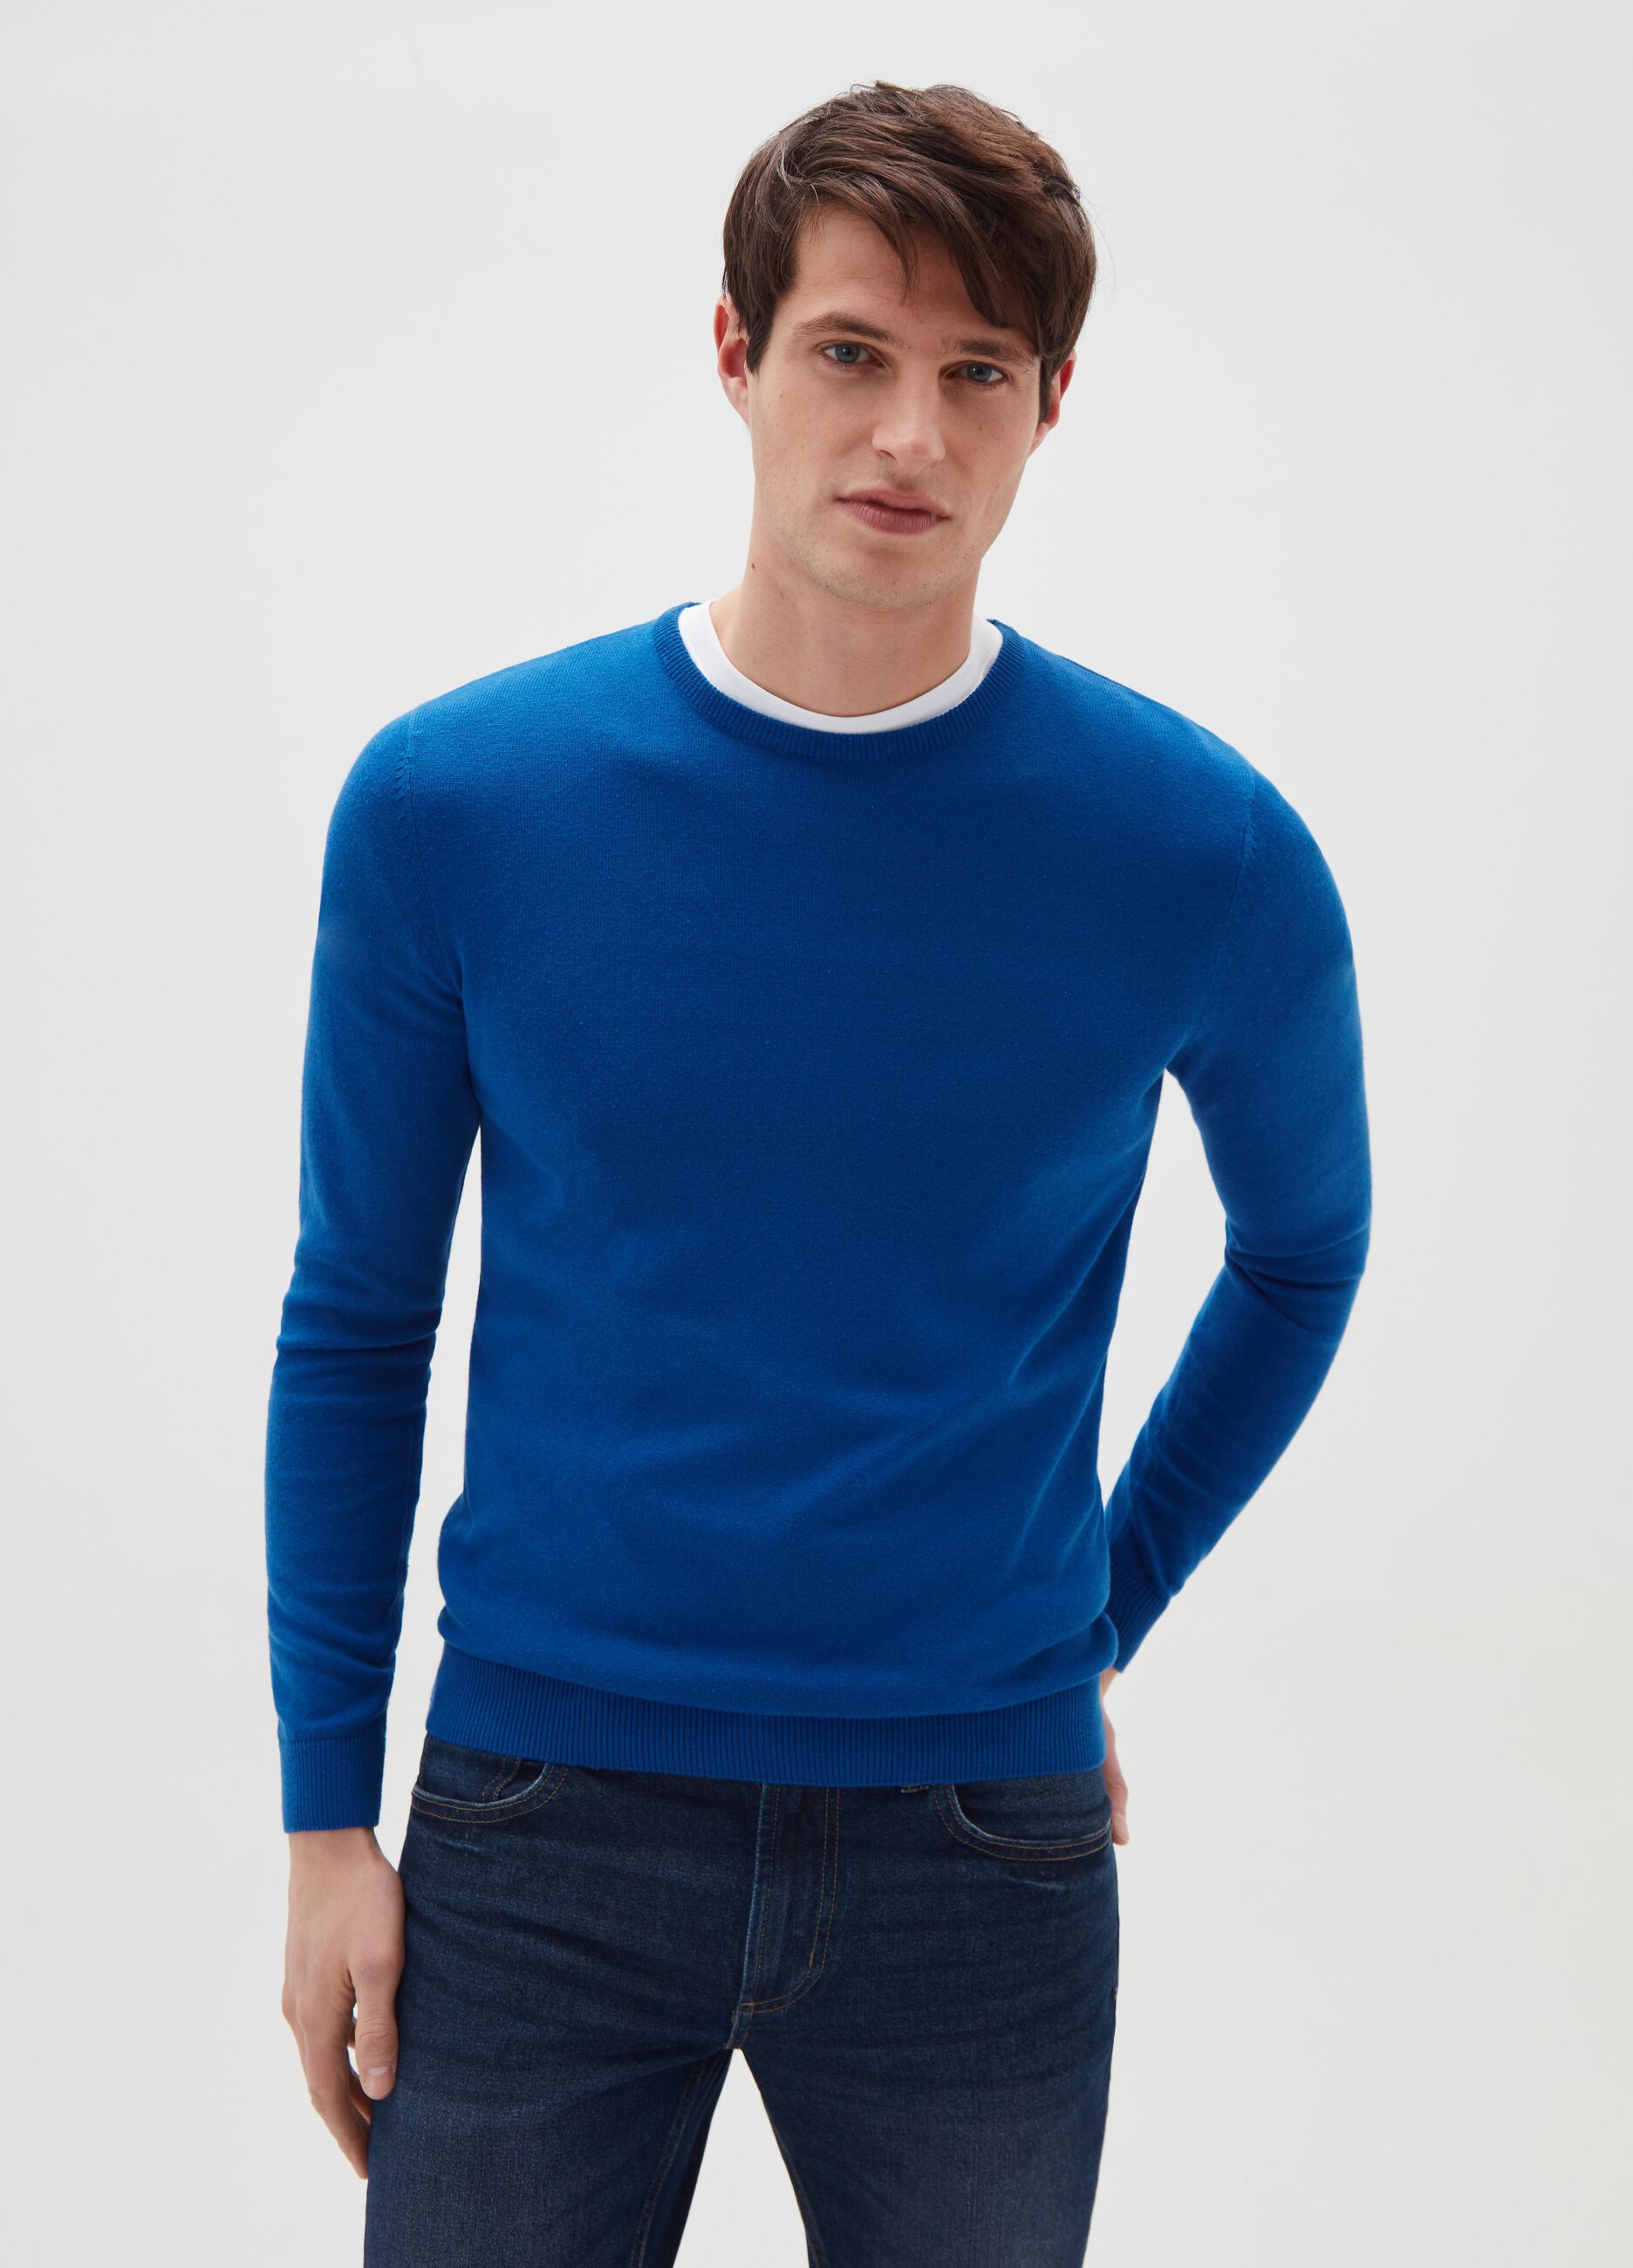 Cotton blend pullover with round neck